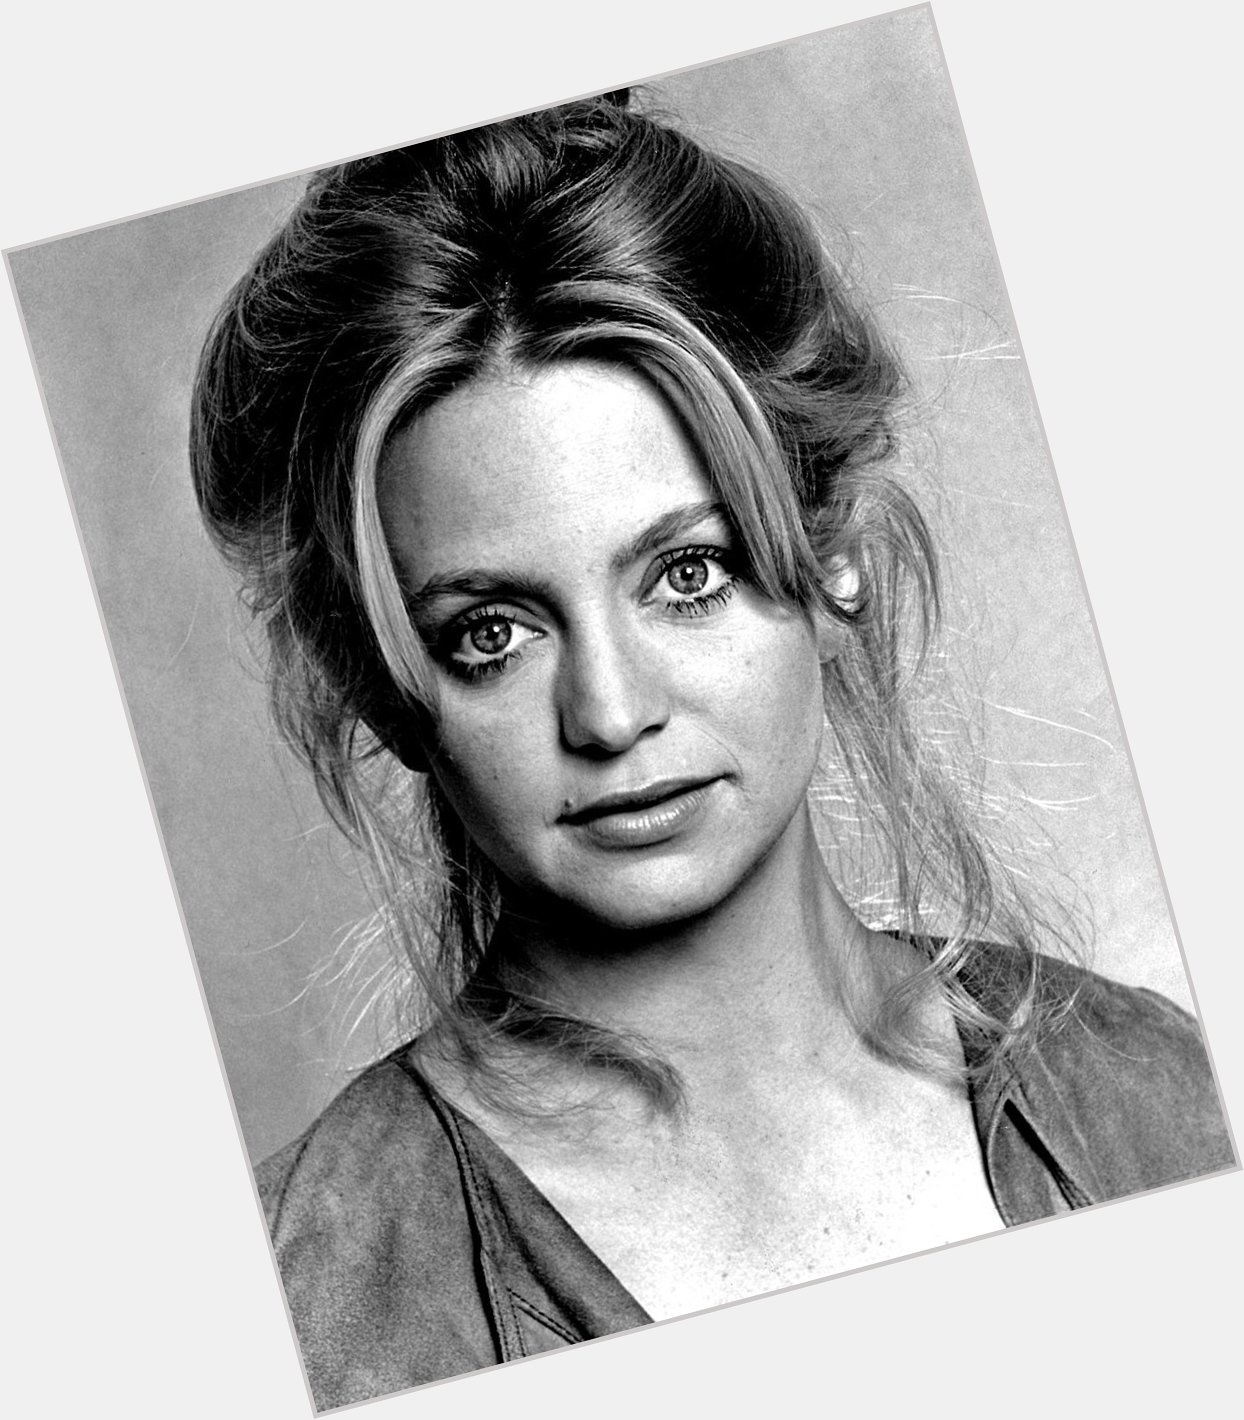 Happy Birthday to Goldie Hawn! She turns 73 today. 